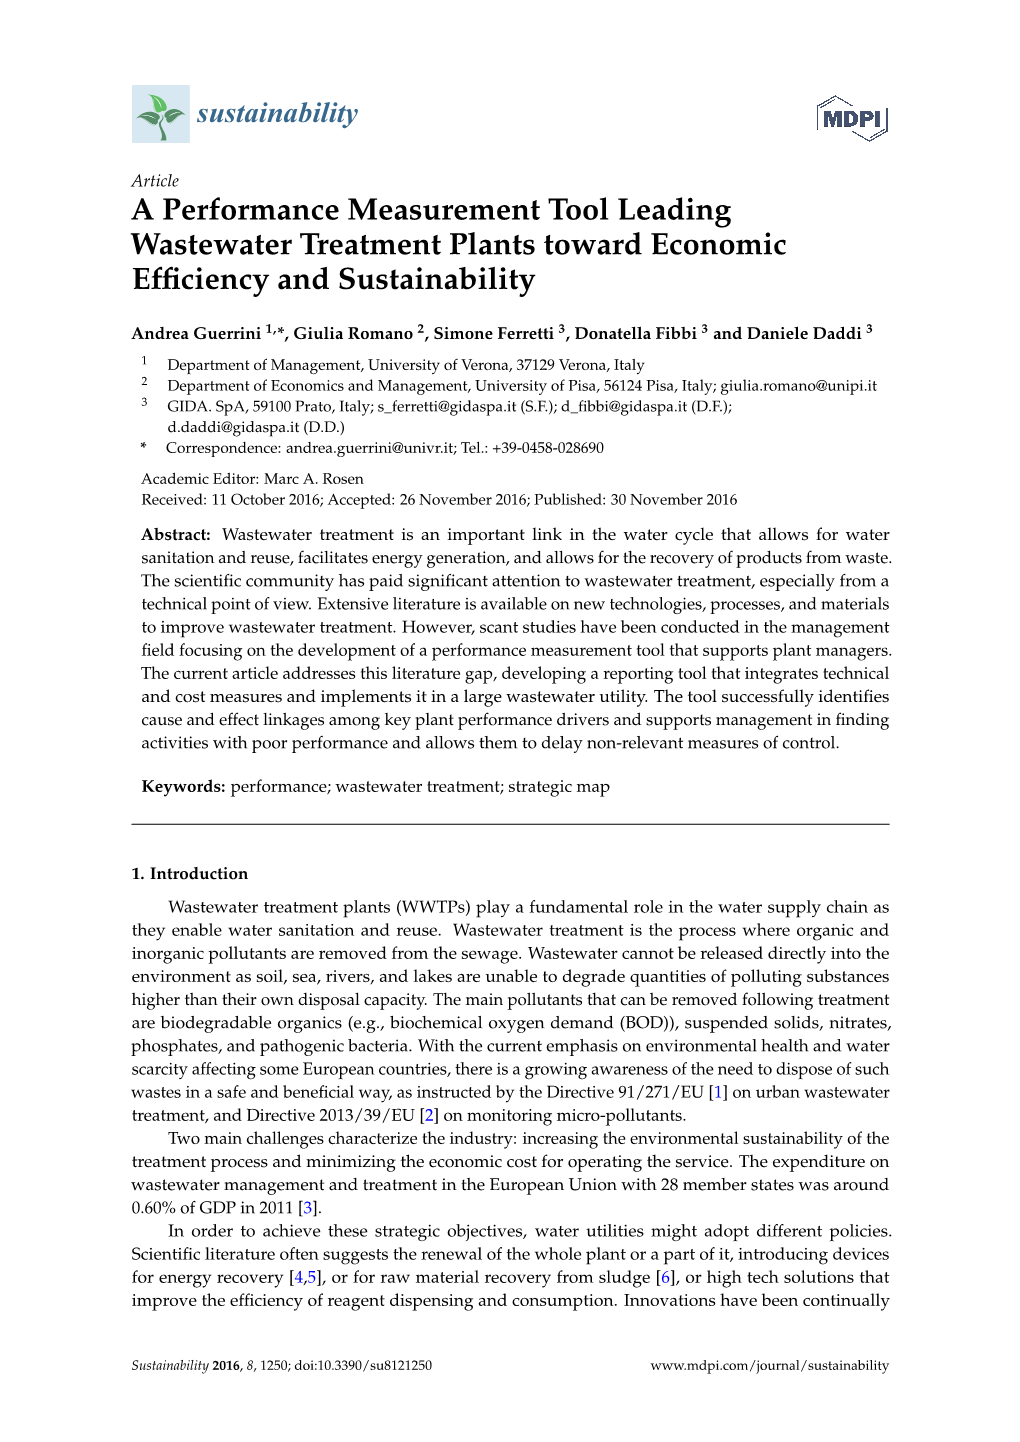 A Performance Measurement Tool Leading Wastewater Treatment Plants Toward Economic Efﬁciency and Sustainability